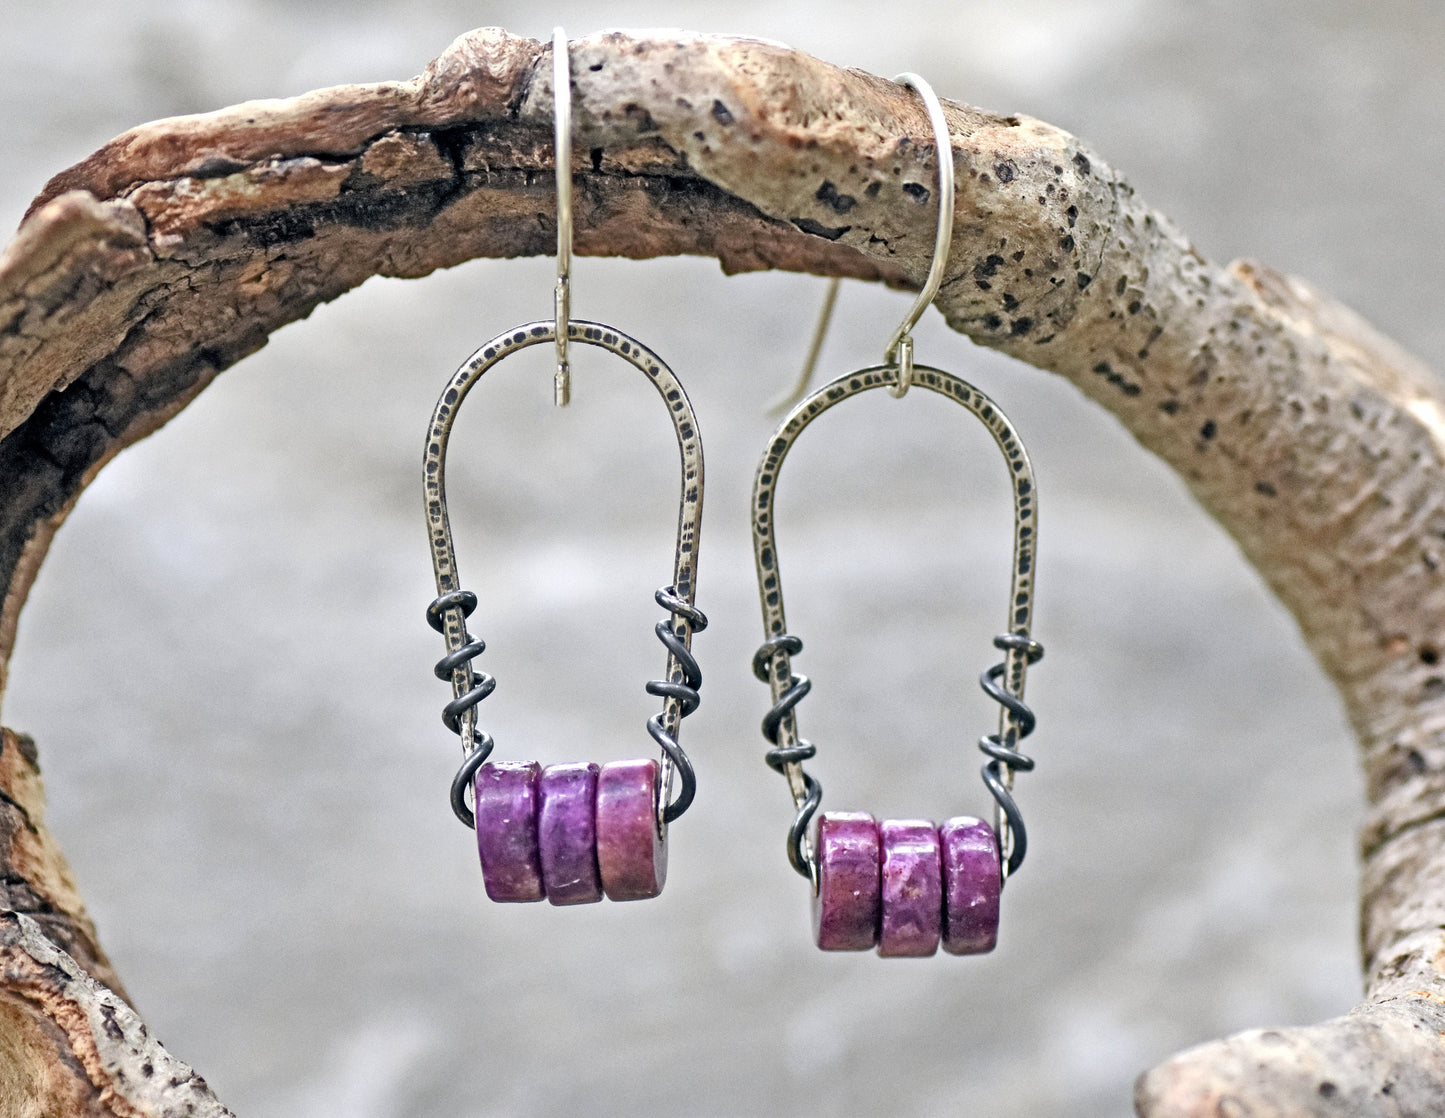 Lepidolite Earrings Sterling Silver, Magenta Gemstone Dangles, Rustic Wire Jewelry, Natural Fuchsia Stone, Bright Purple Pink